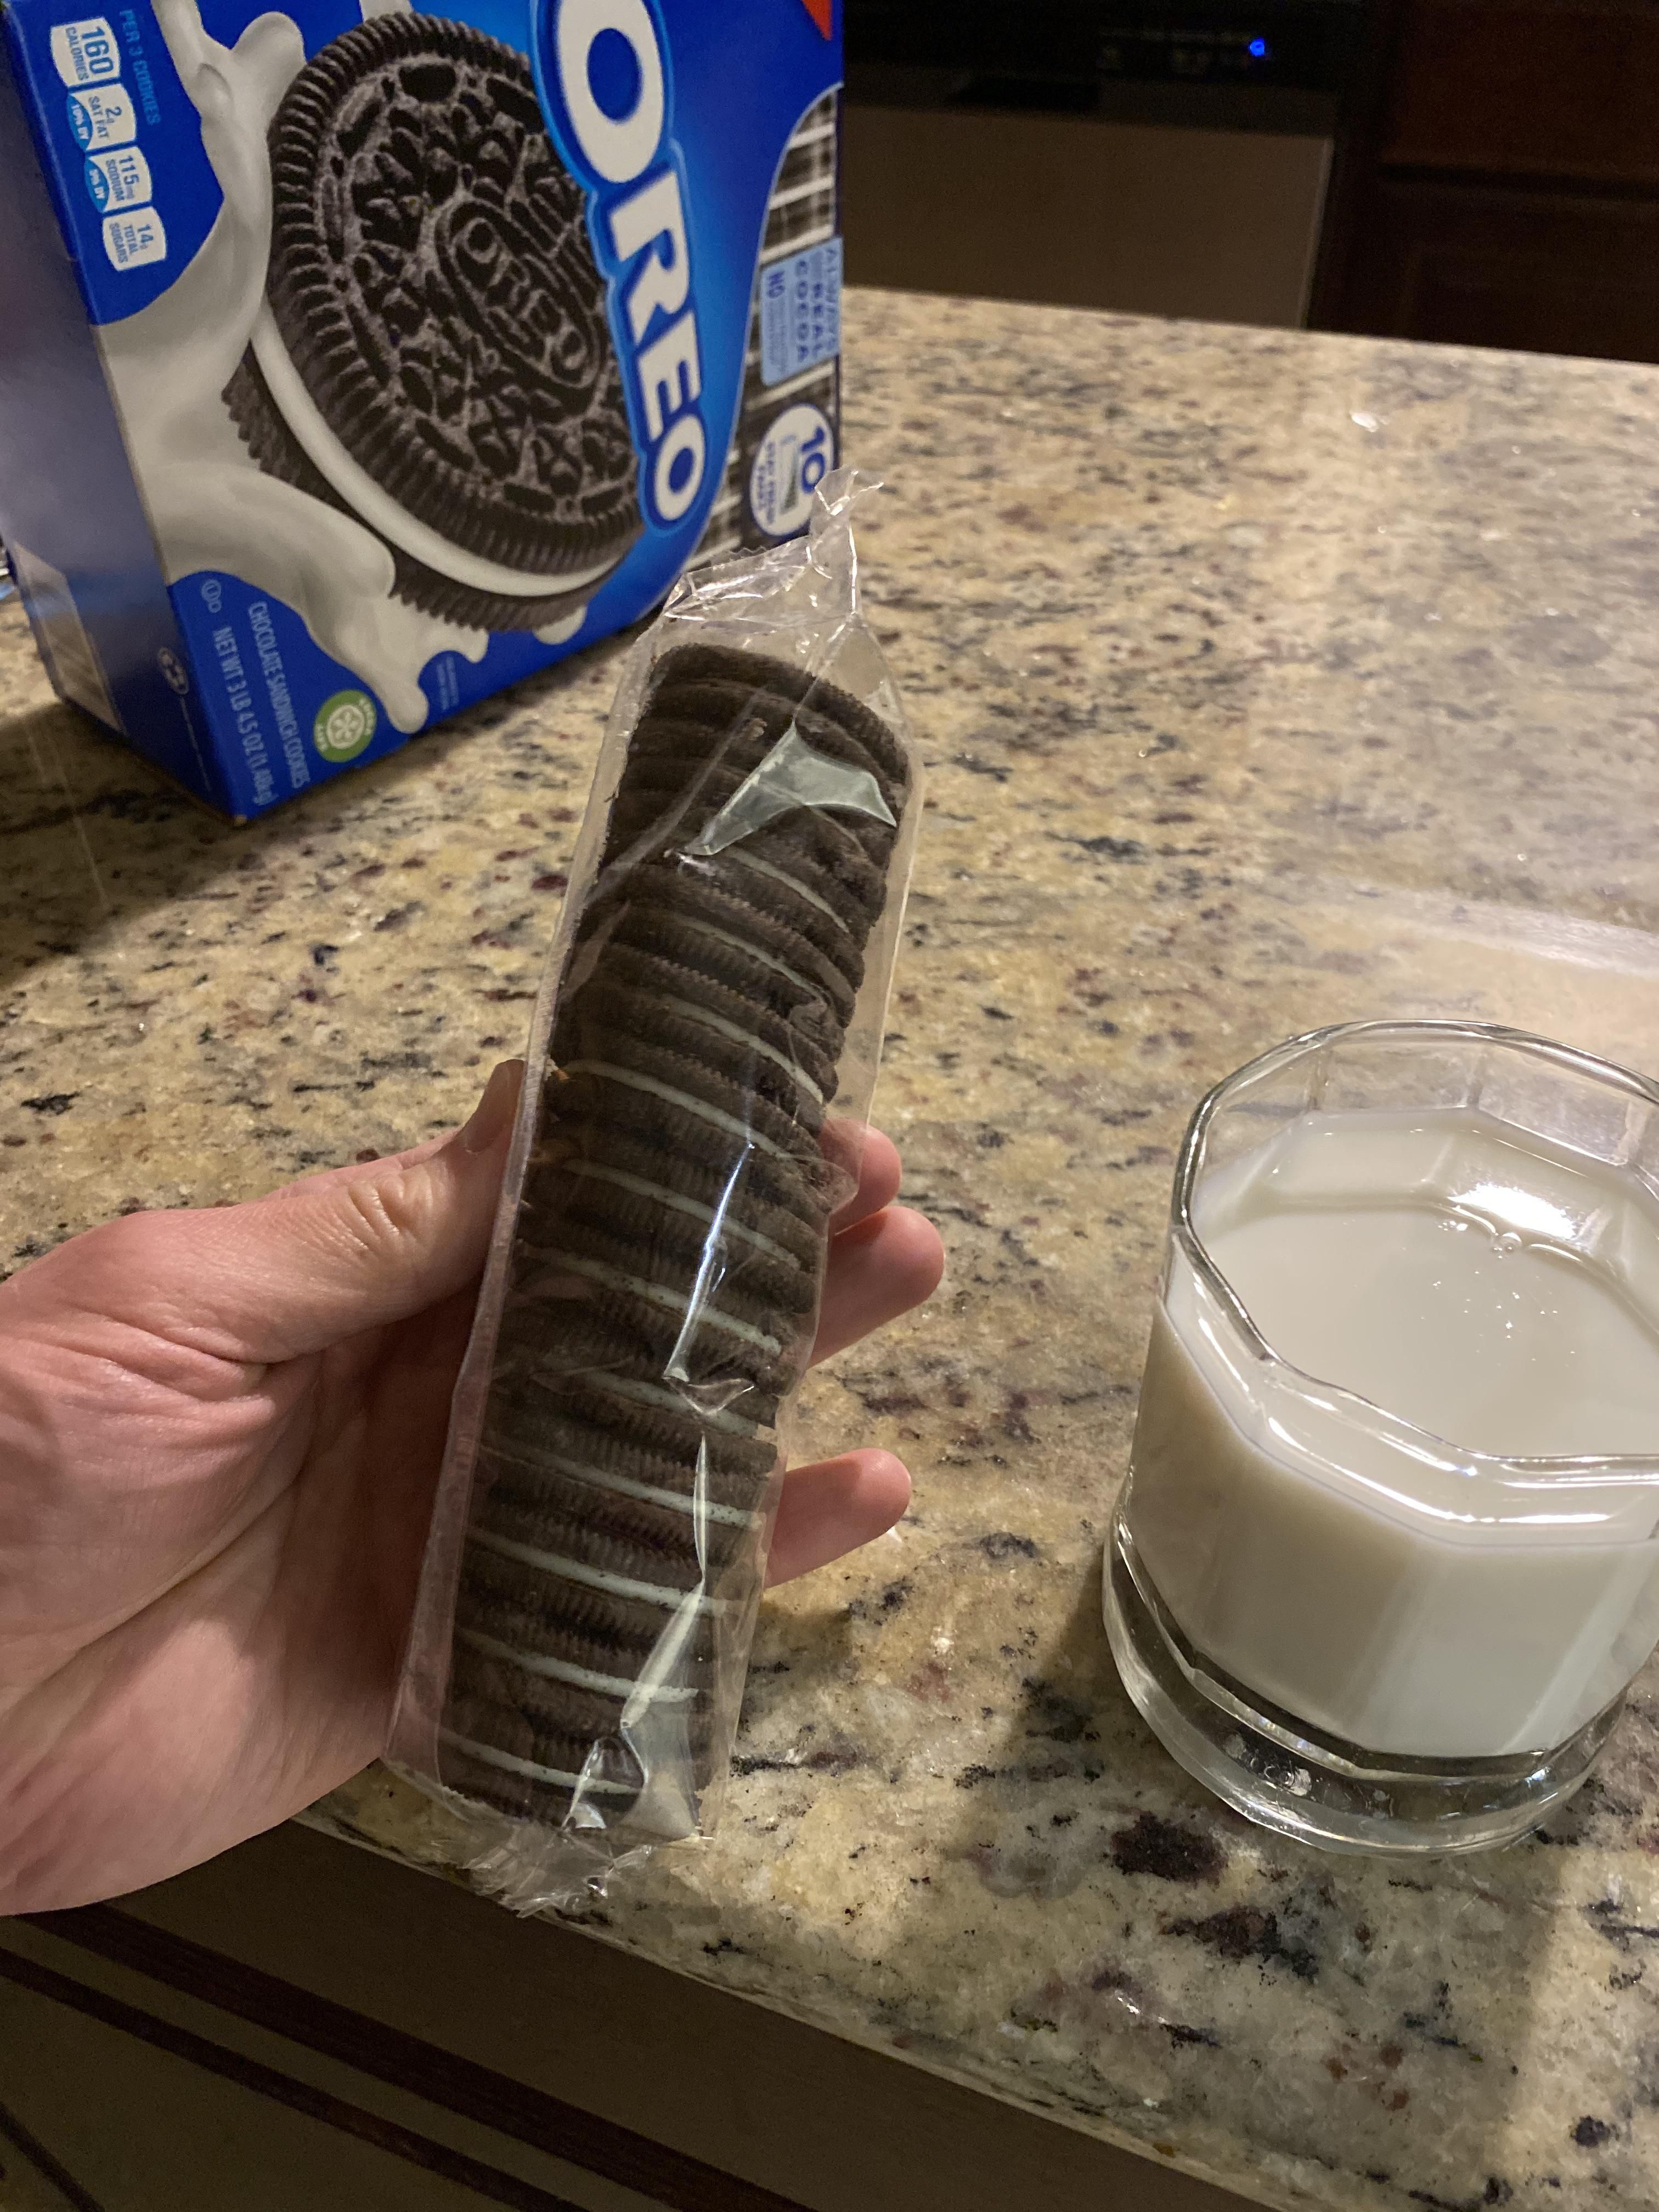 I went to Costco today before lunch and ended up bringing home a box of Oreos. I’m super surprised they come so conveniently packaged into single serving sleeves!